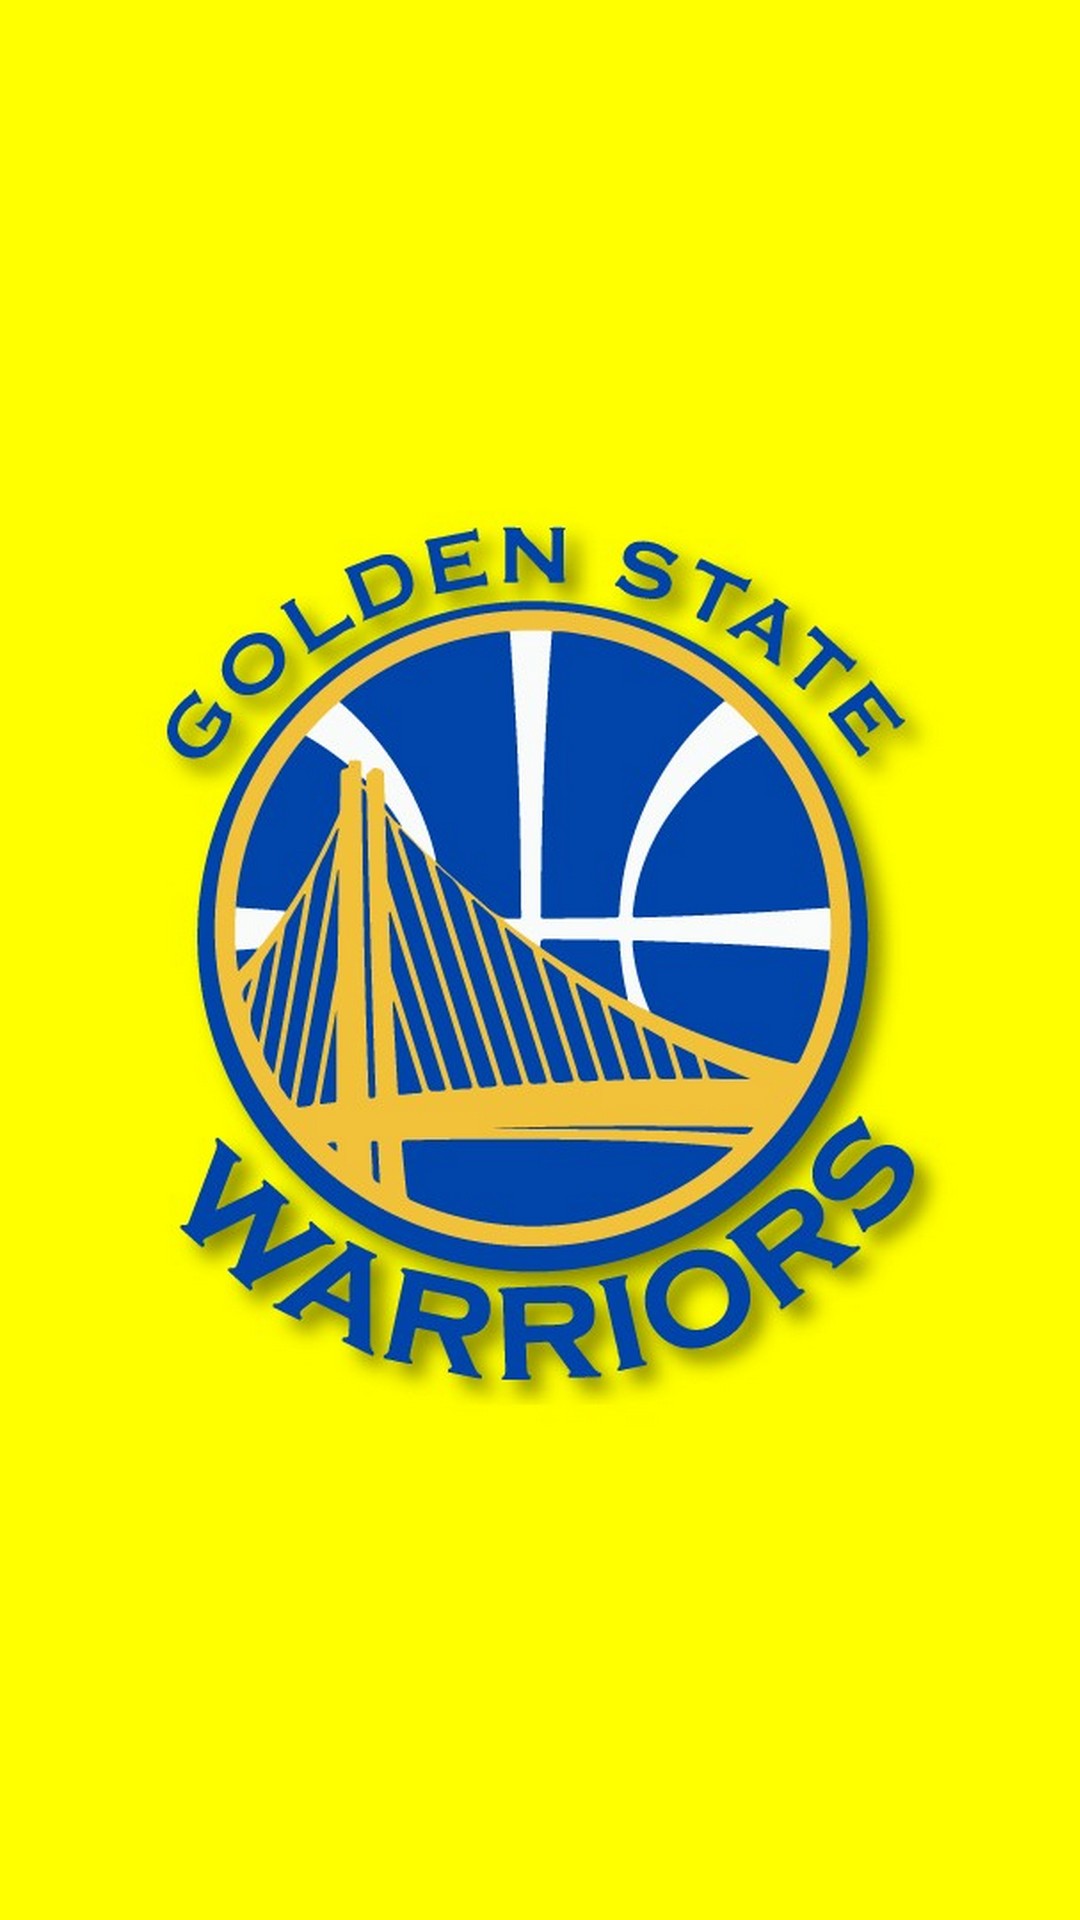 Golden State Warriors Background For Android with image resolution 1080x1920 pixel. You can make this wallpaper for your Desktop Computer Backgrounds, Mac Wallpapers, Android Lock screen or iPhone Screensavers